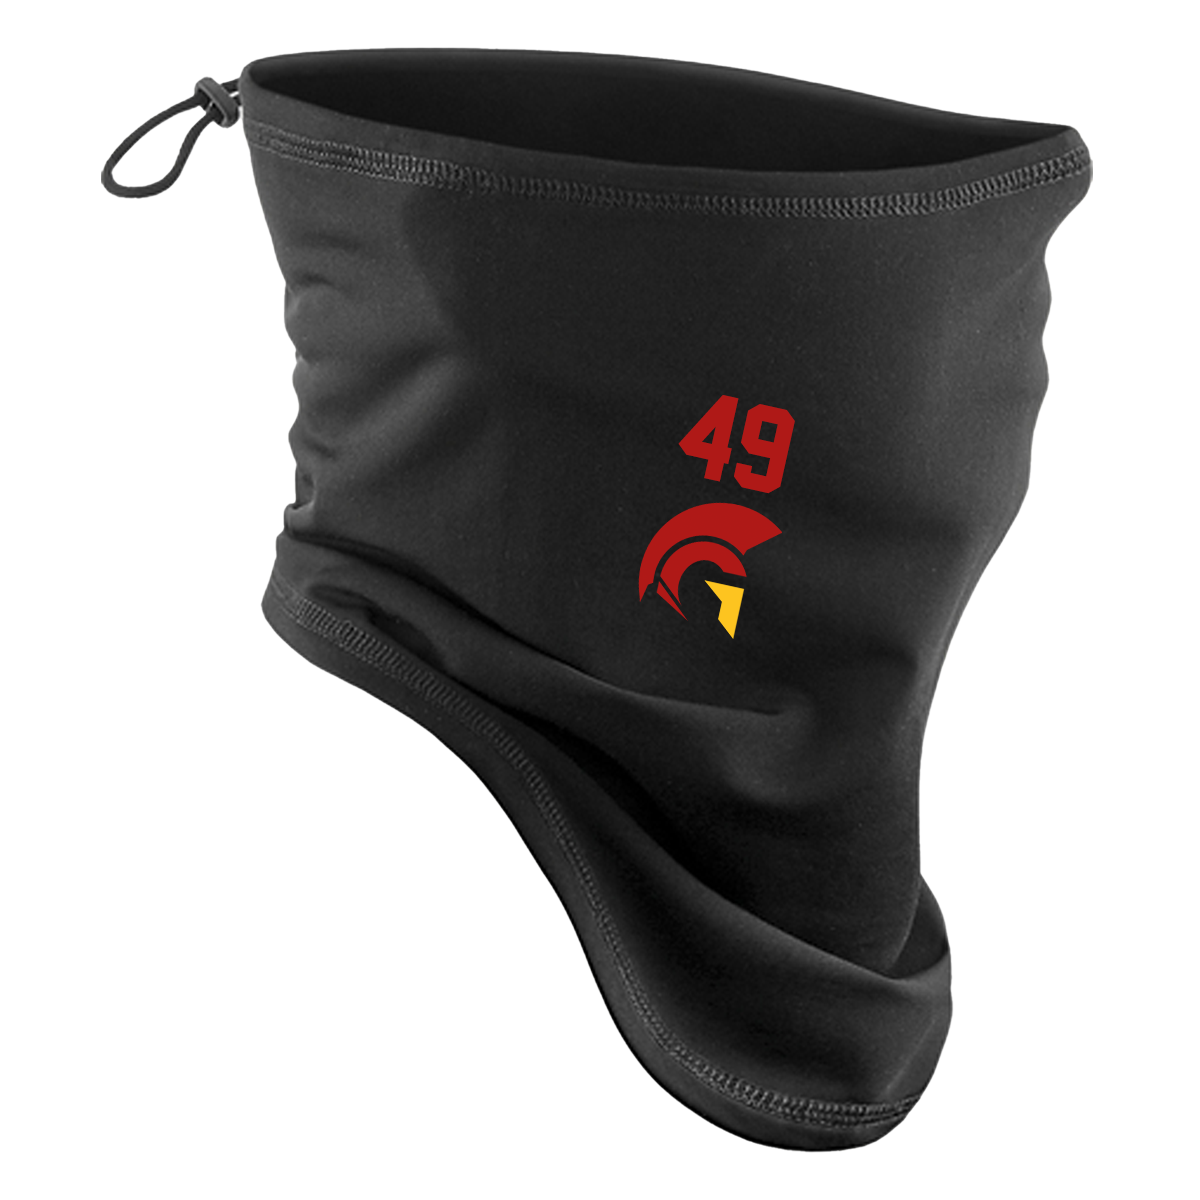 Gladiators Softshell Sports Tech Neck Warmer CB320 with Playernumber/Initials